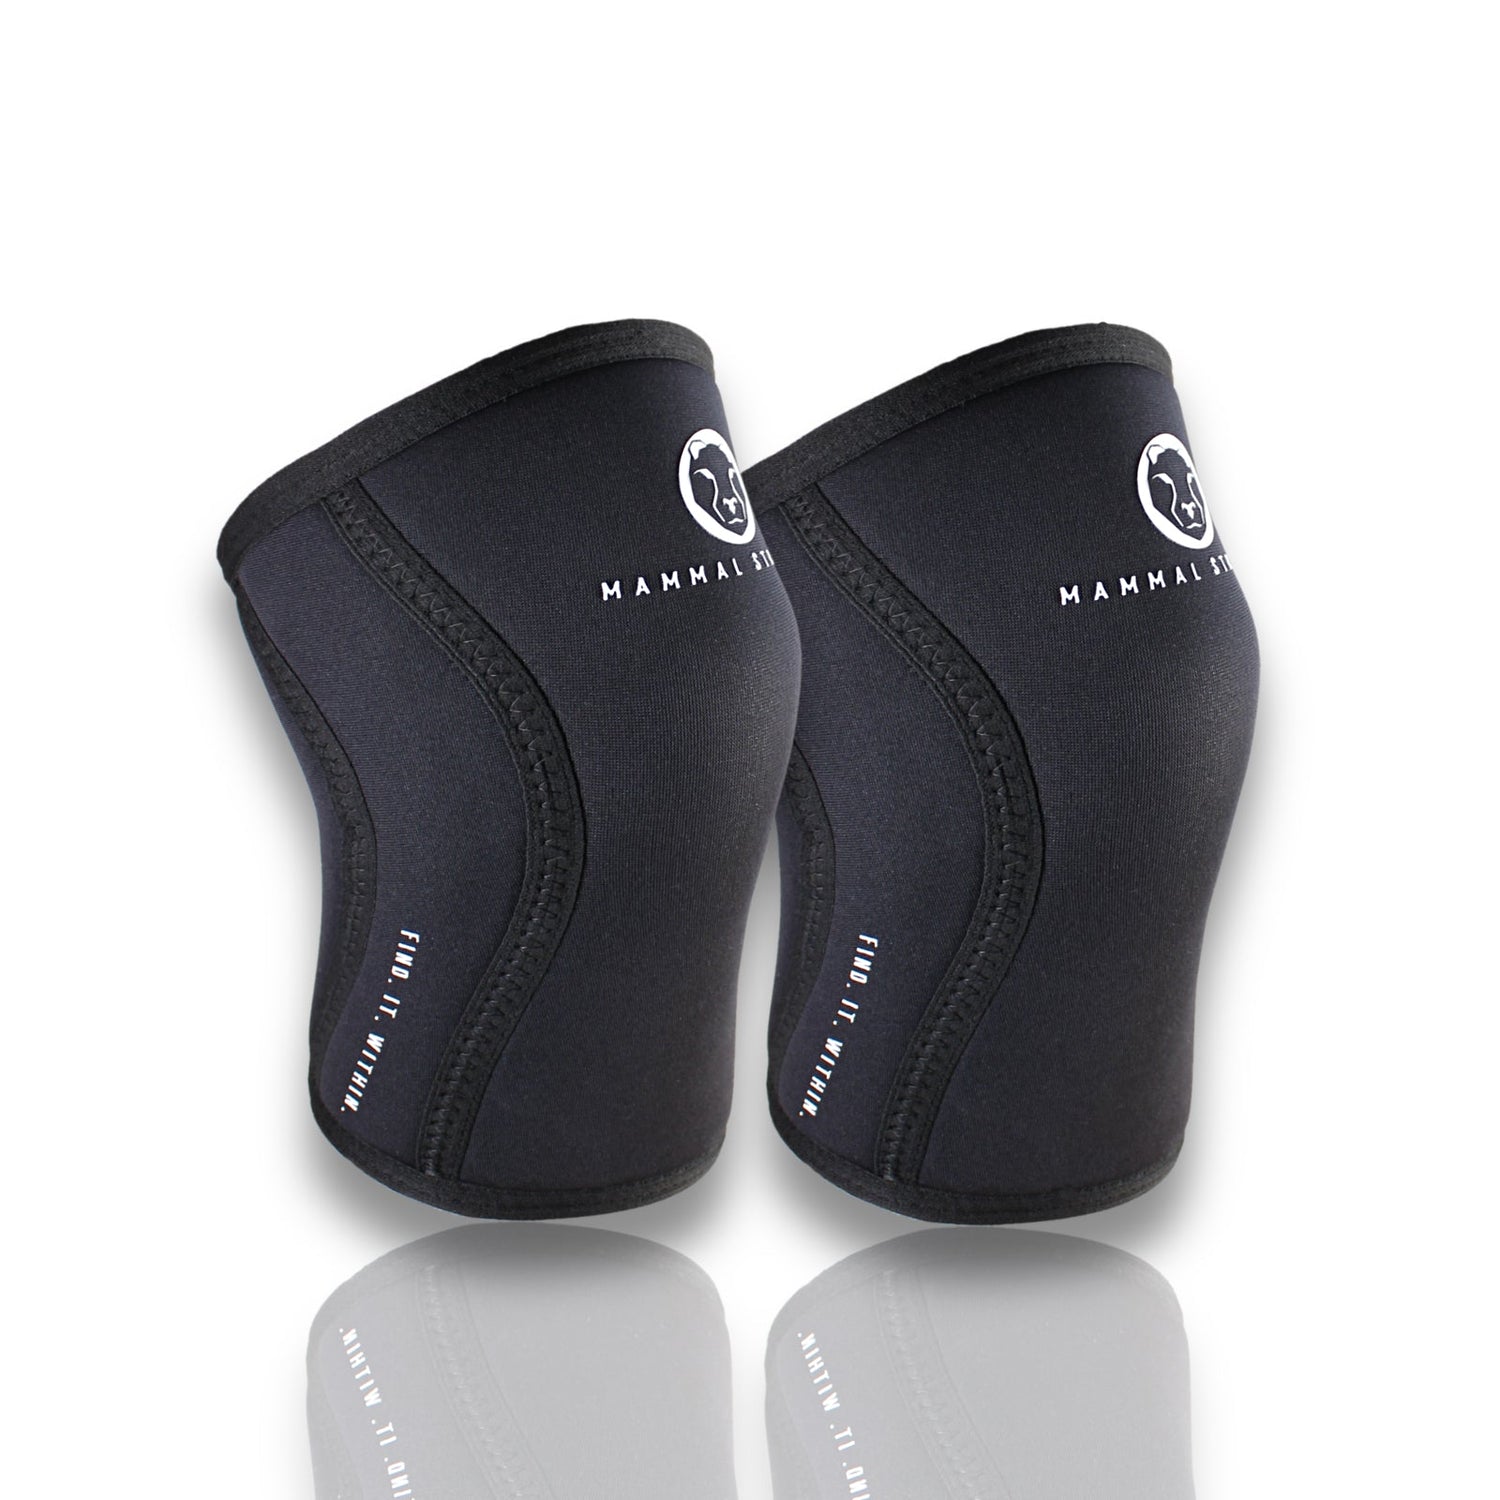 Non-Compression Knee Sleeves Pair - Medium Weight